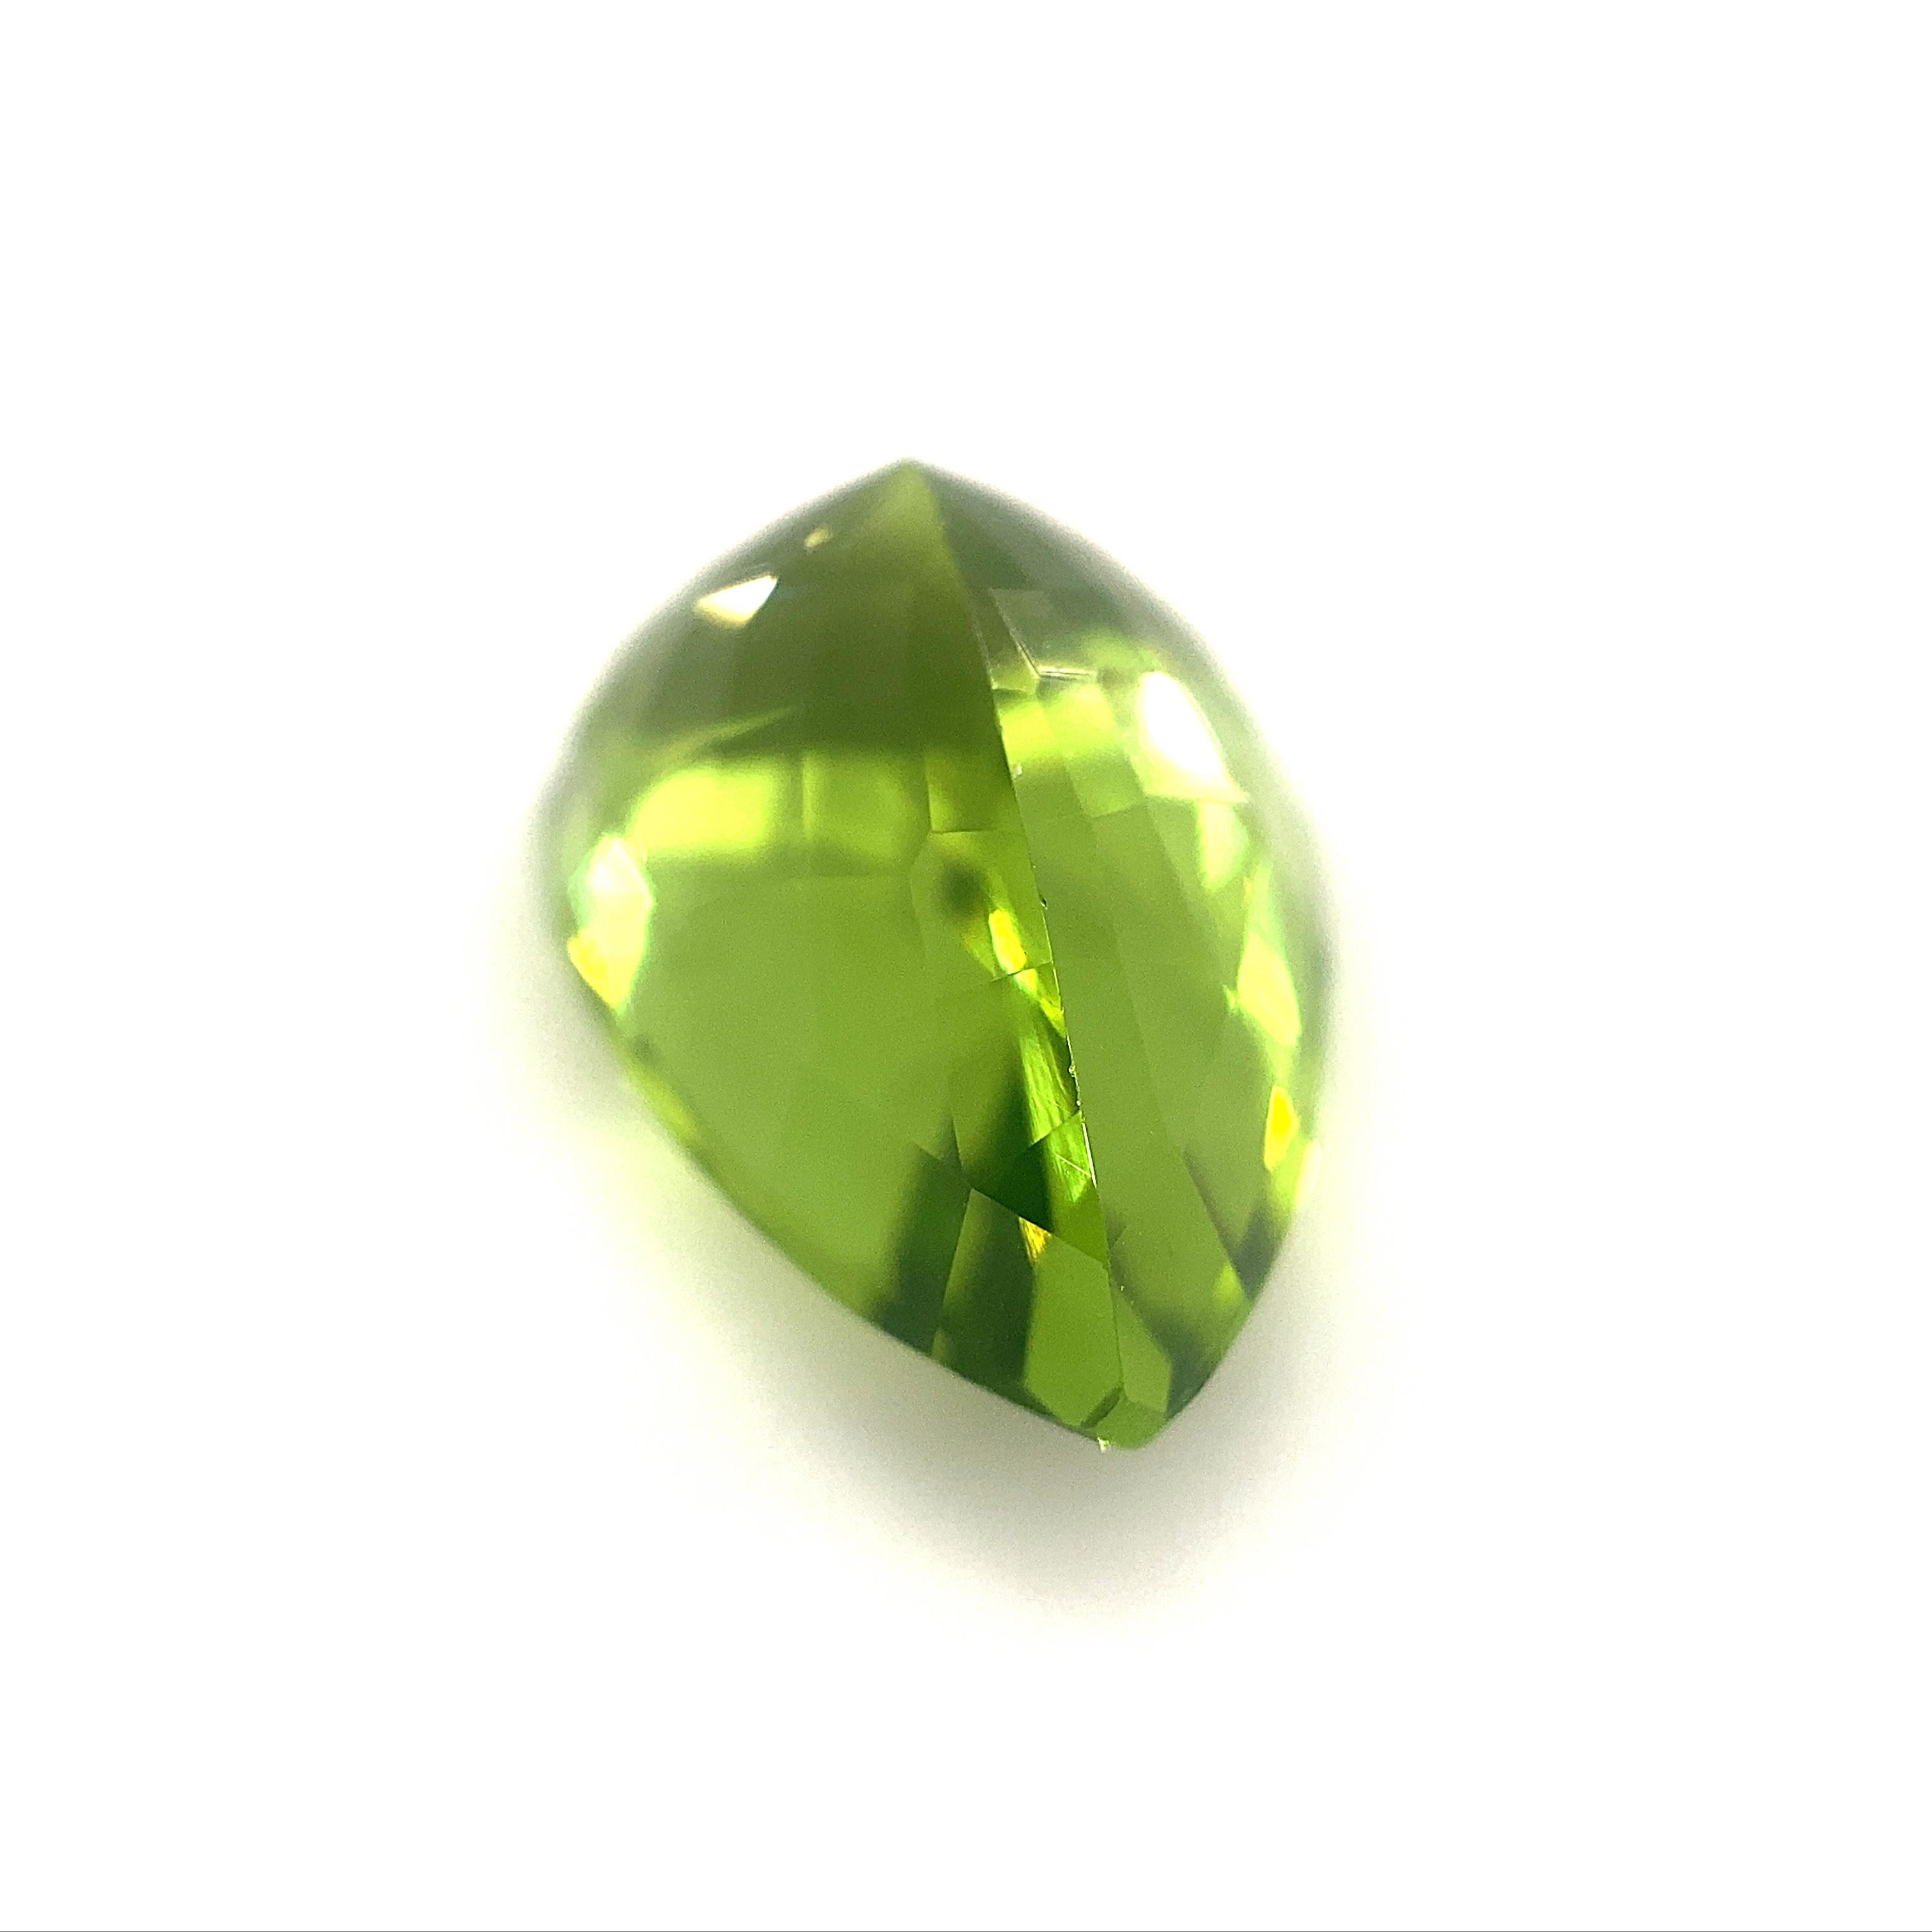 This is a stunning GIA Certified Peridot 

The GIA report reads as follows:

GIA Report Number: 2211647425
Shape: Pear
Cutting Style: 
Cutting Style: Crown: Brilliant Cut
Cutting Style: Pavilion: Modified Brilliant Cut
Transparency: